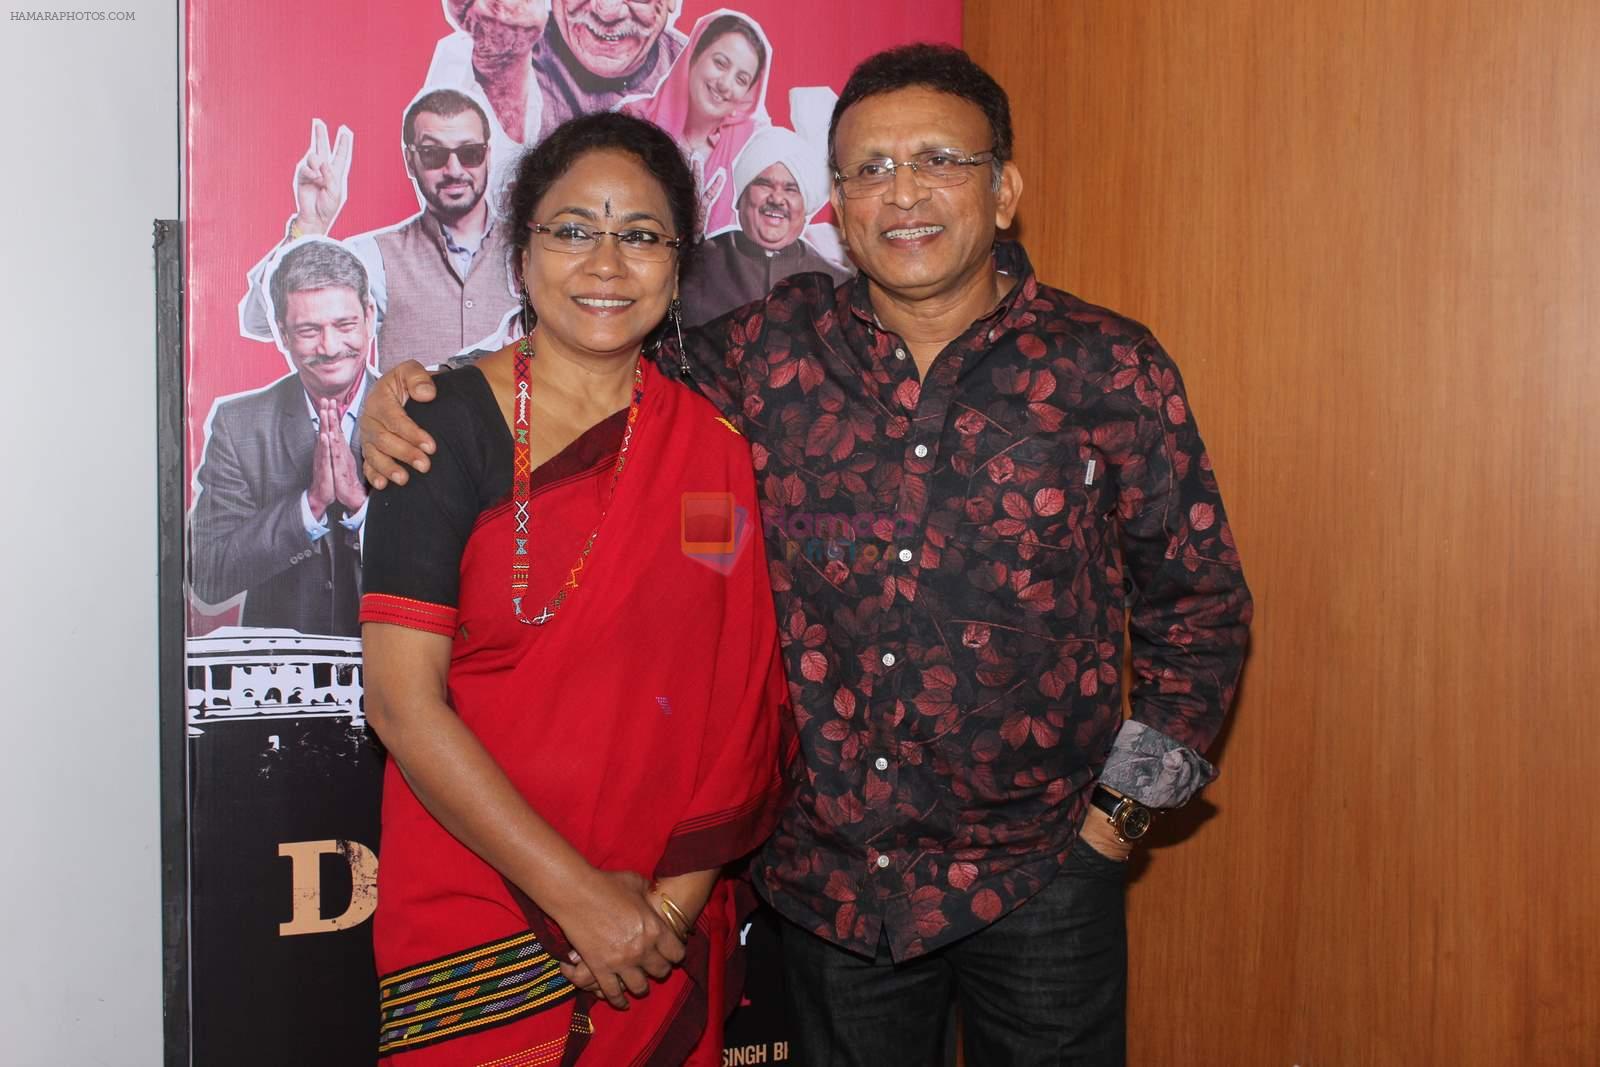 Seema Biswas, Annu Kapoor at Jai Ho Democracy trailor launch in The Club on 18th March 2015